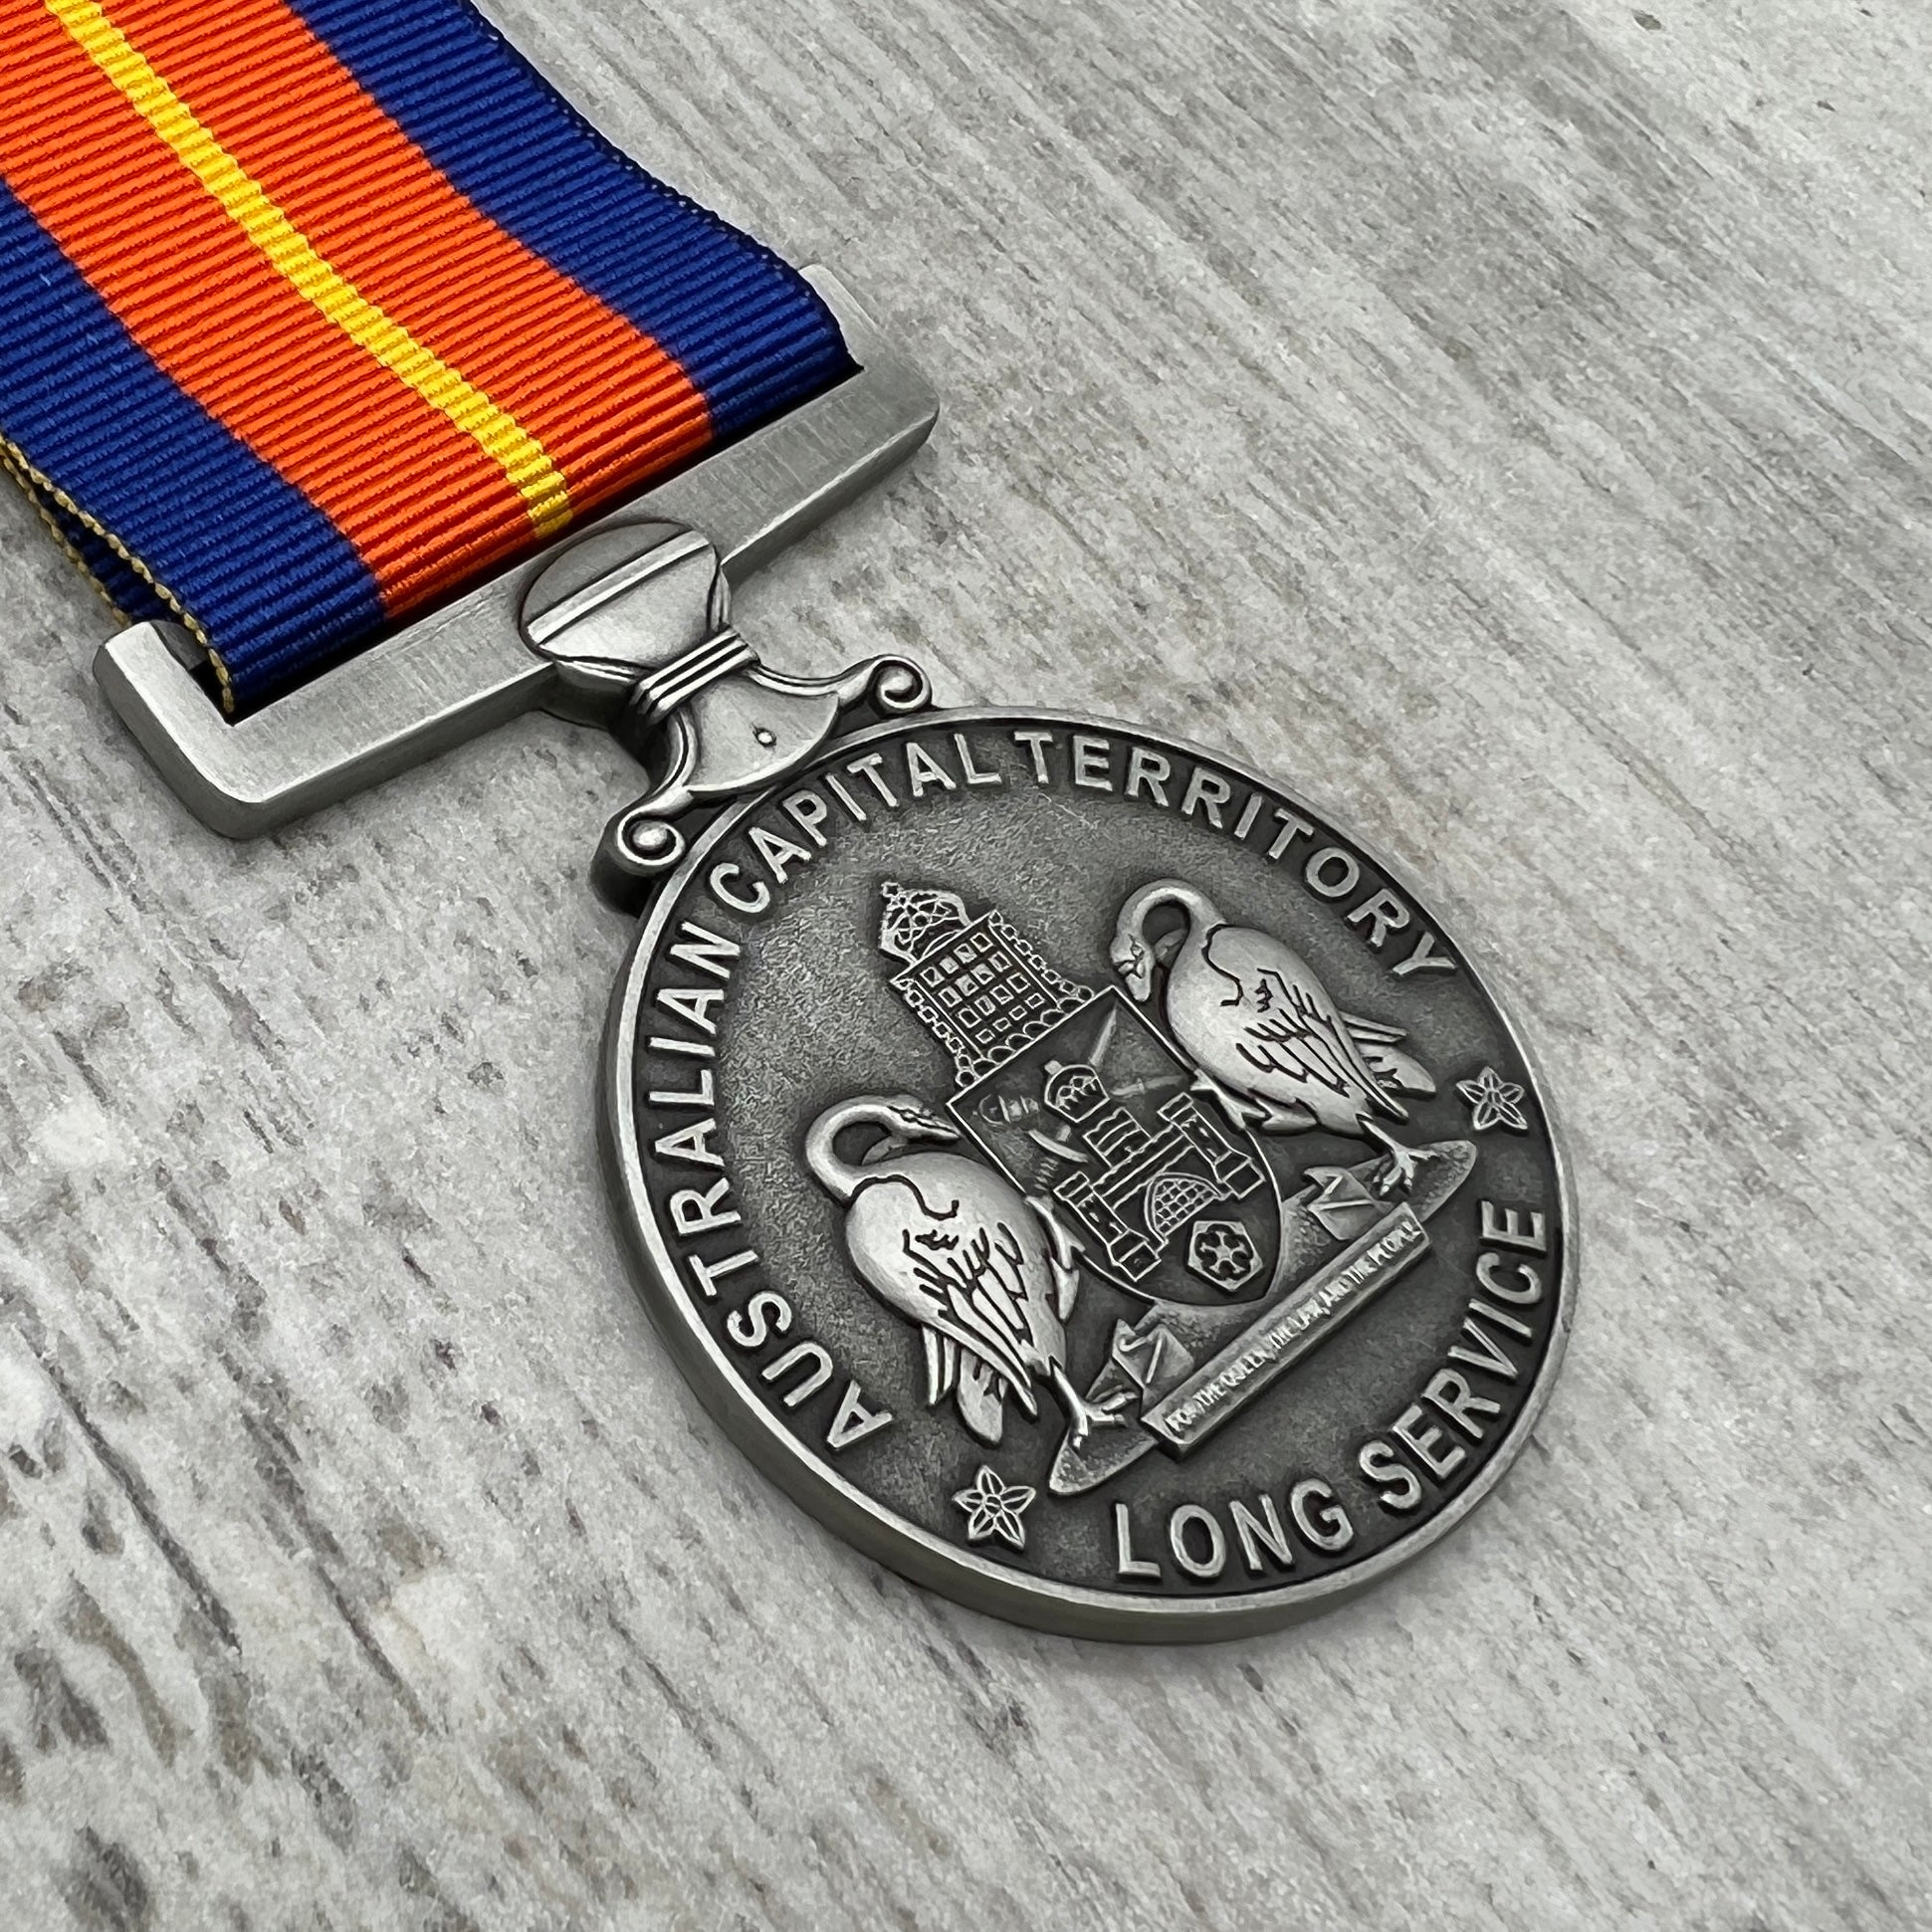 Australian Capital Territory - State Emergency Service Long Service Medal - Foxhole Medals